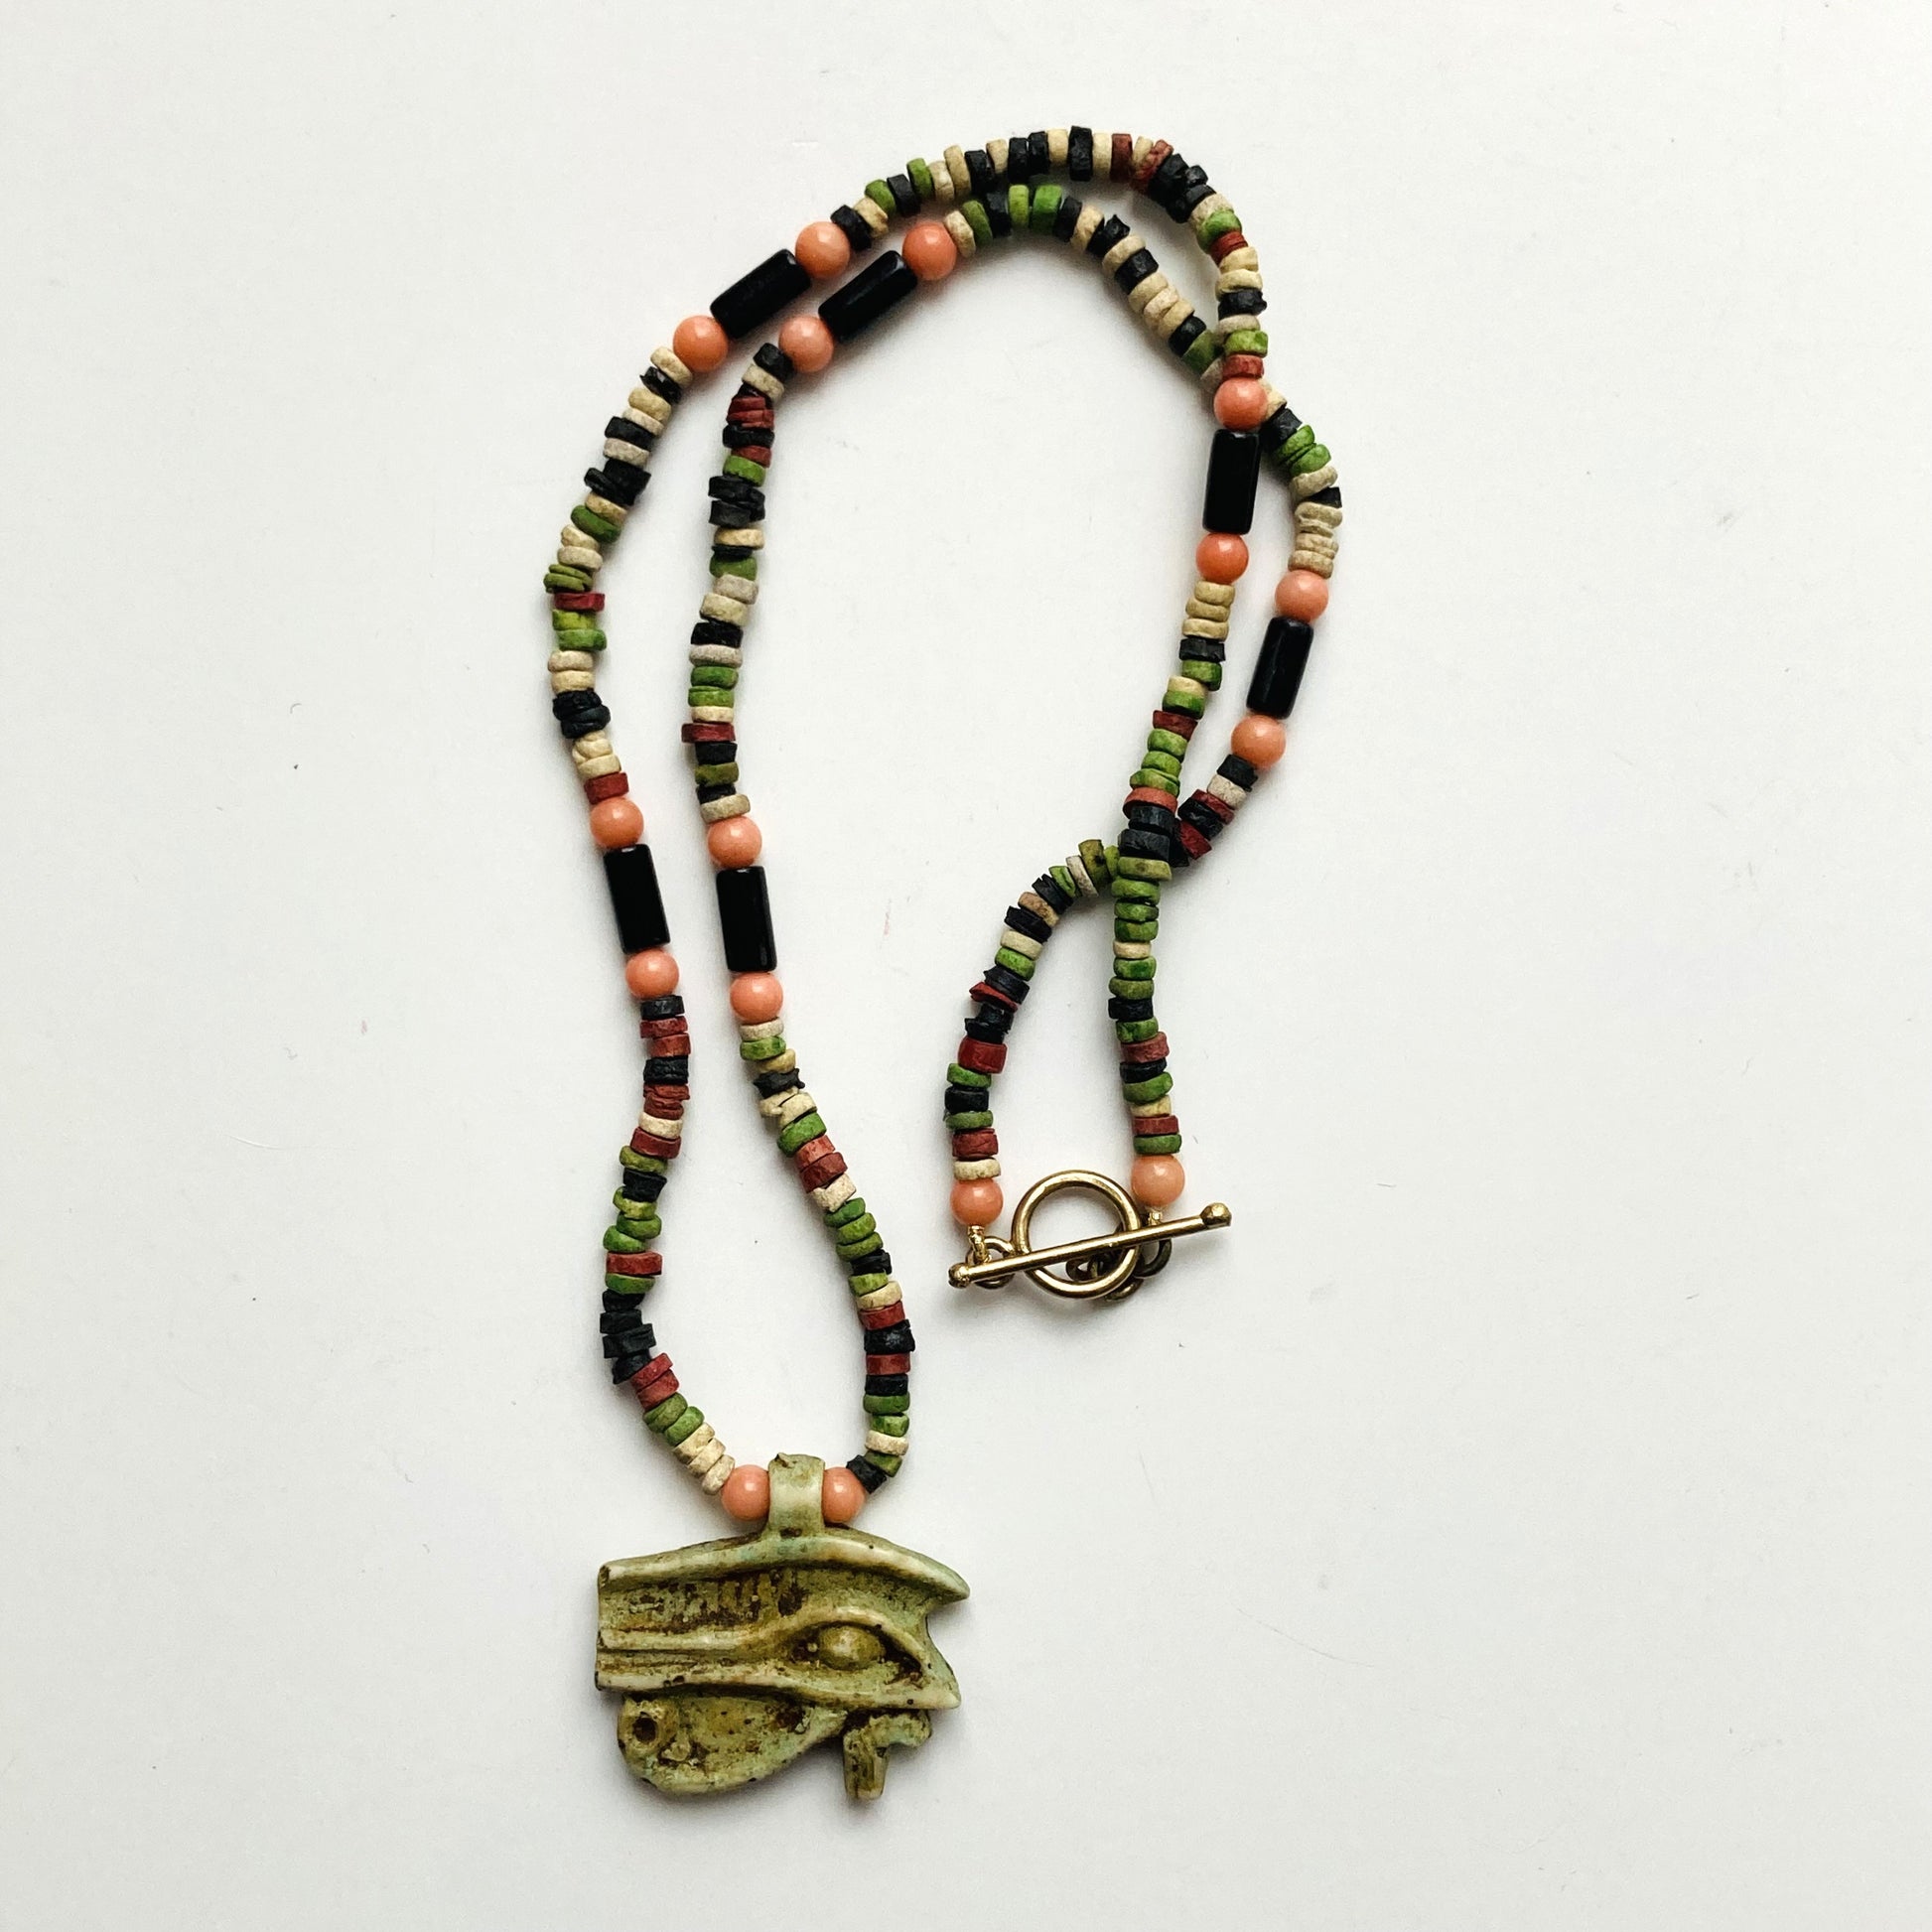 Ancient Egyptian Necklace with Horus Eye Amulet